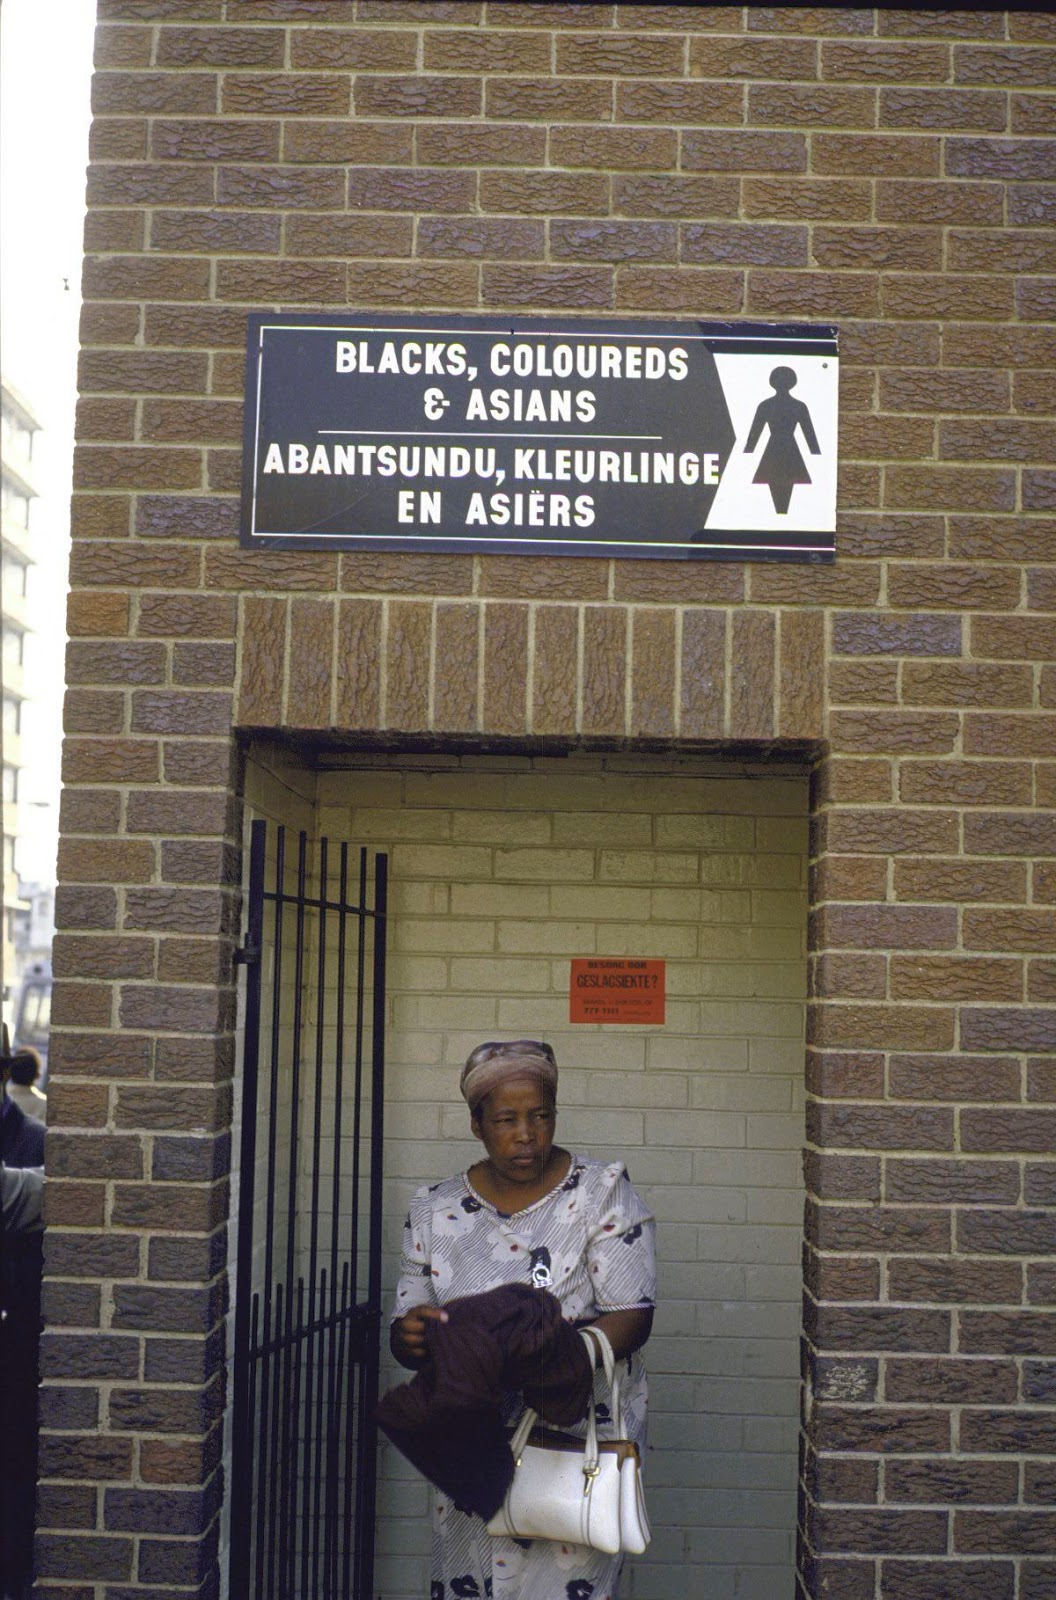 South African Apartheid Signs